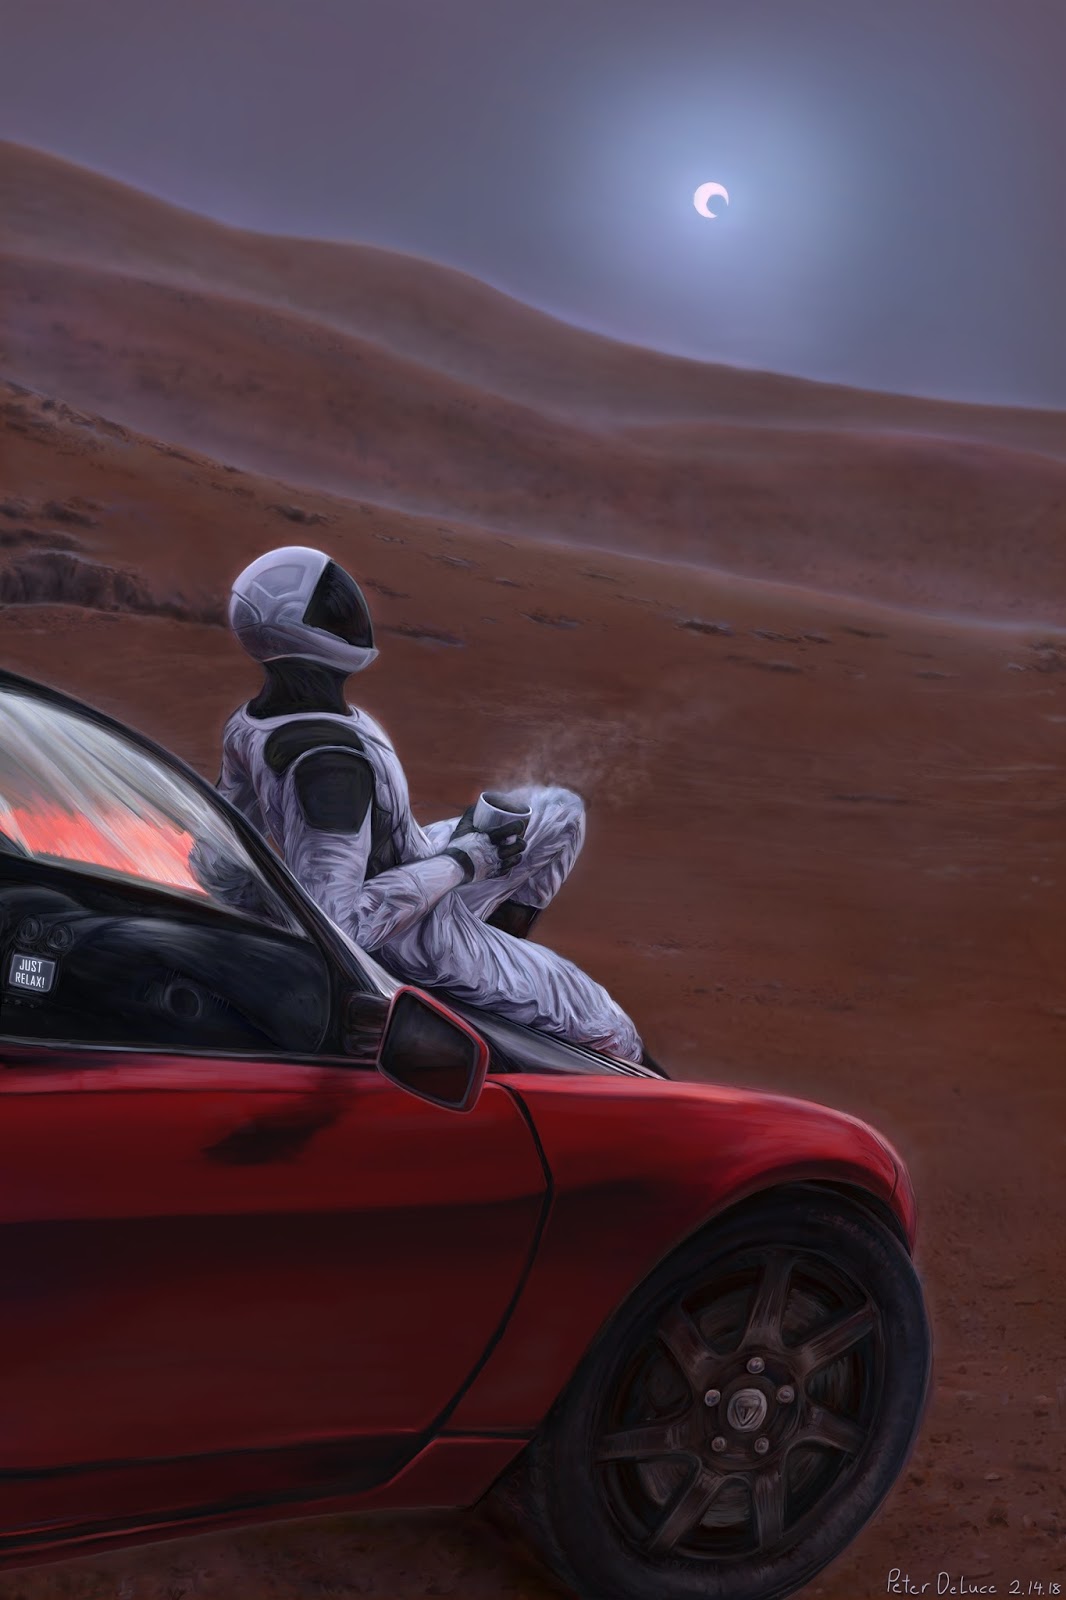 Starman with his Tesla Roadster on Mars by Peter DeLuce